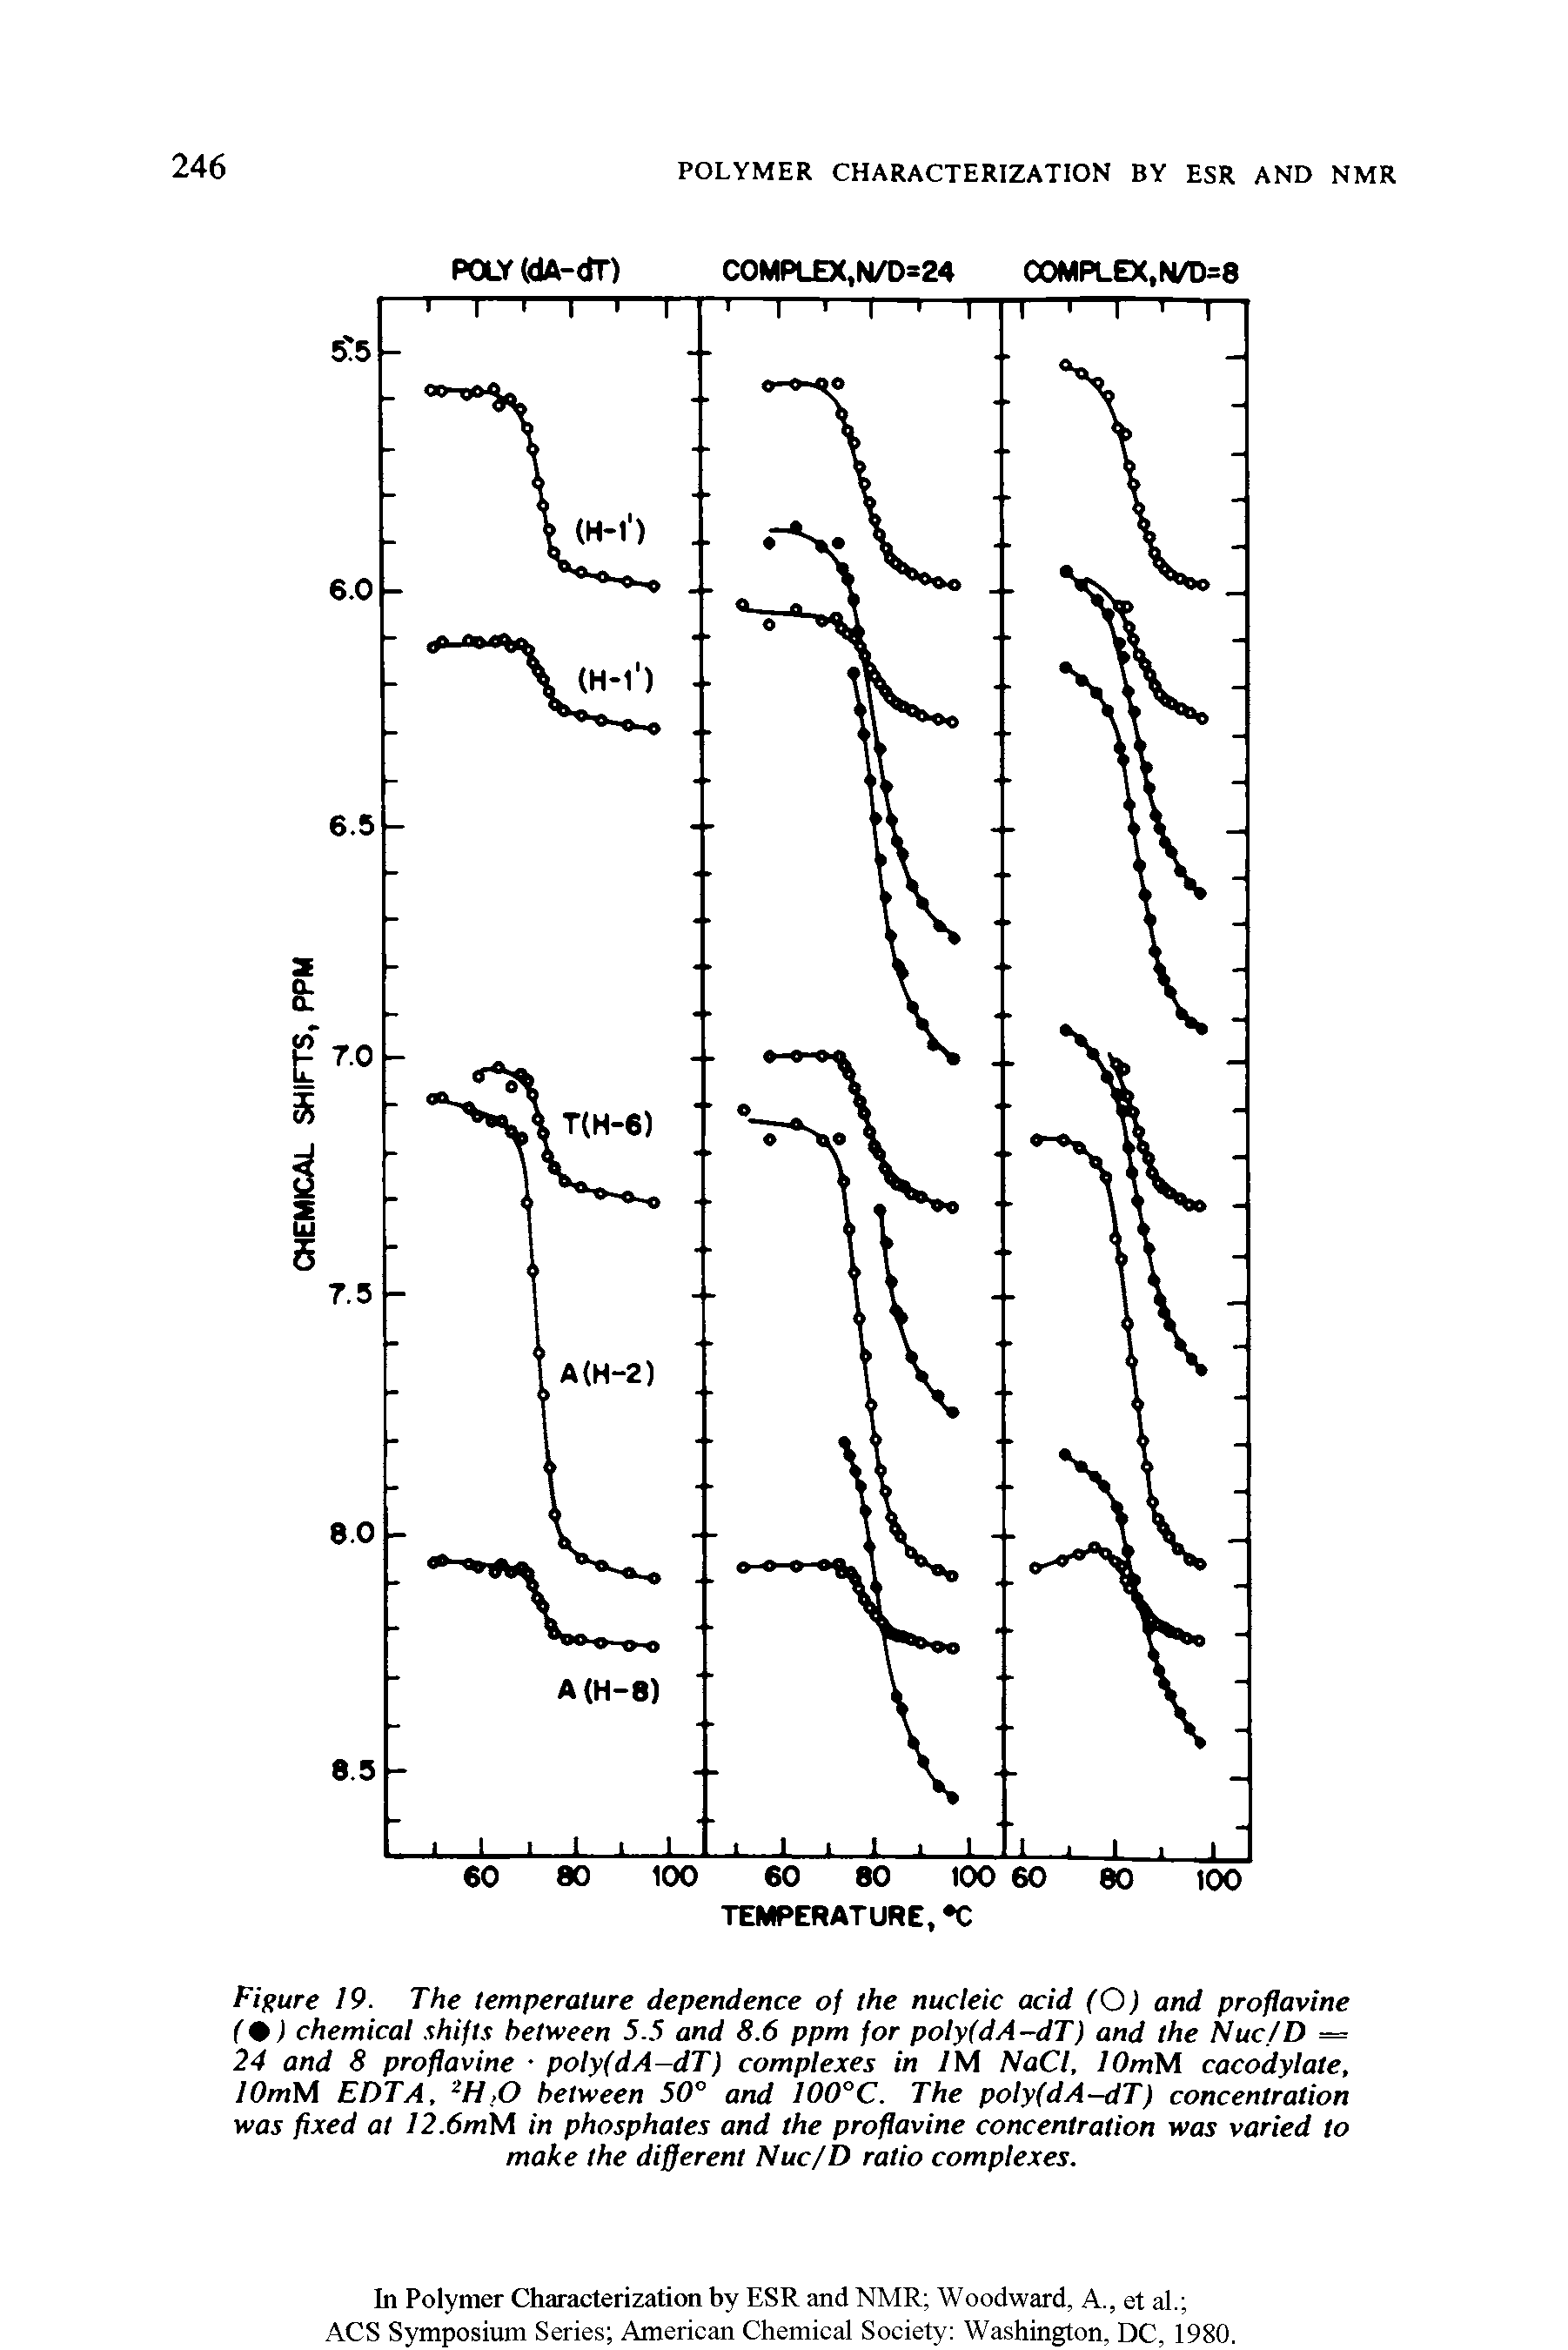 Figure 19. The temperature dependence of the nucleic acid (O) and proflavine (0) chemical shifts between 5.5 and 8.6 ppm for poly(dA-dT) and the Nuc/D = 24 and 8 proflavine poly(dA-dT) complexes in /M NaCl, lOmWl cacodylate, lOmM EDTA, 2 HO between 50° and 100°C. The poly(dA-dT) concentration was fixed at I2.6mM in phosphates and the proflavine concentration was varied to make the different Nuc/D ratio complexes.